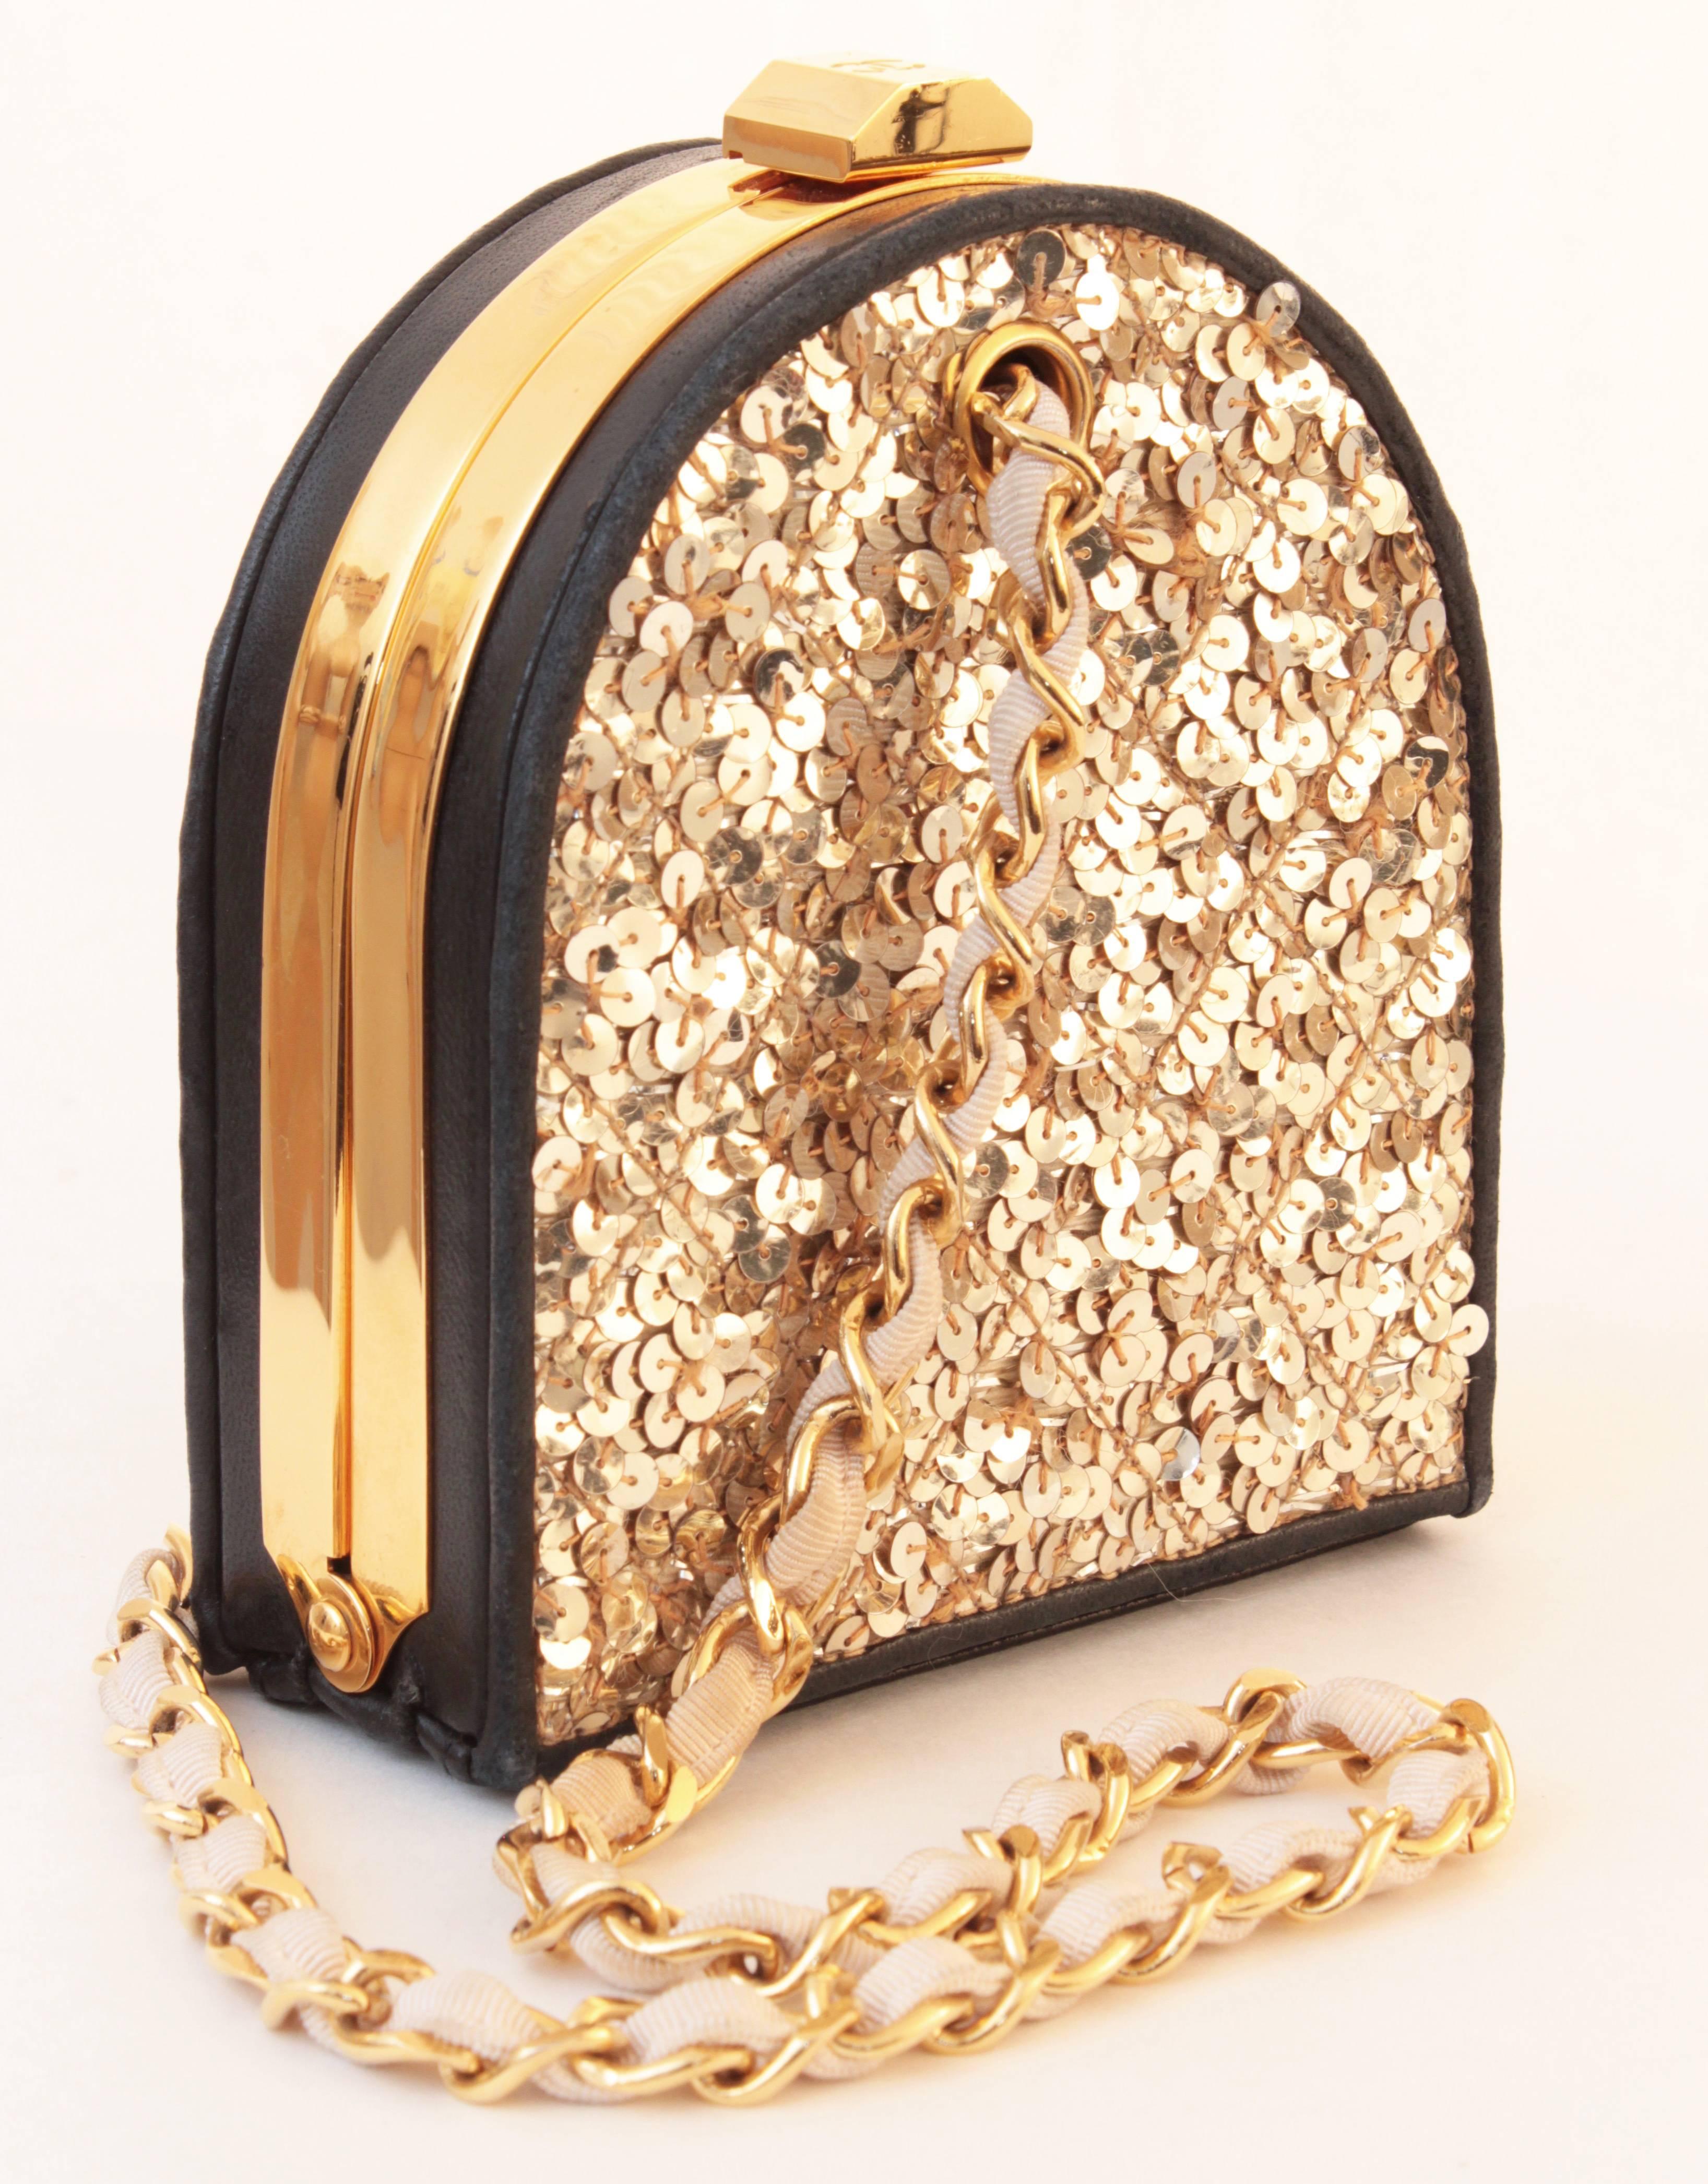 This chic evening bag was made by Chanel and features a structured black leather and gold metal exterior with glimmering sequins.  The interior is lined in black lambskin and features a small elasticized pocket.  The silk and gold chain straps can